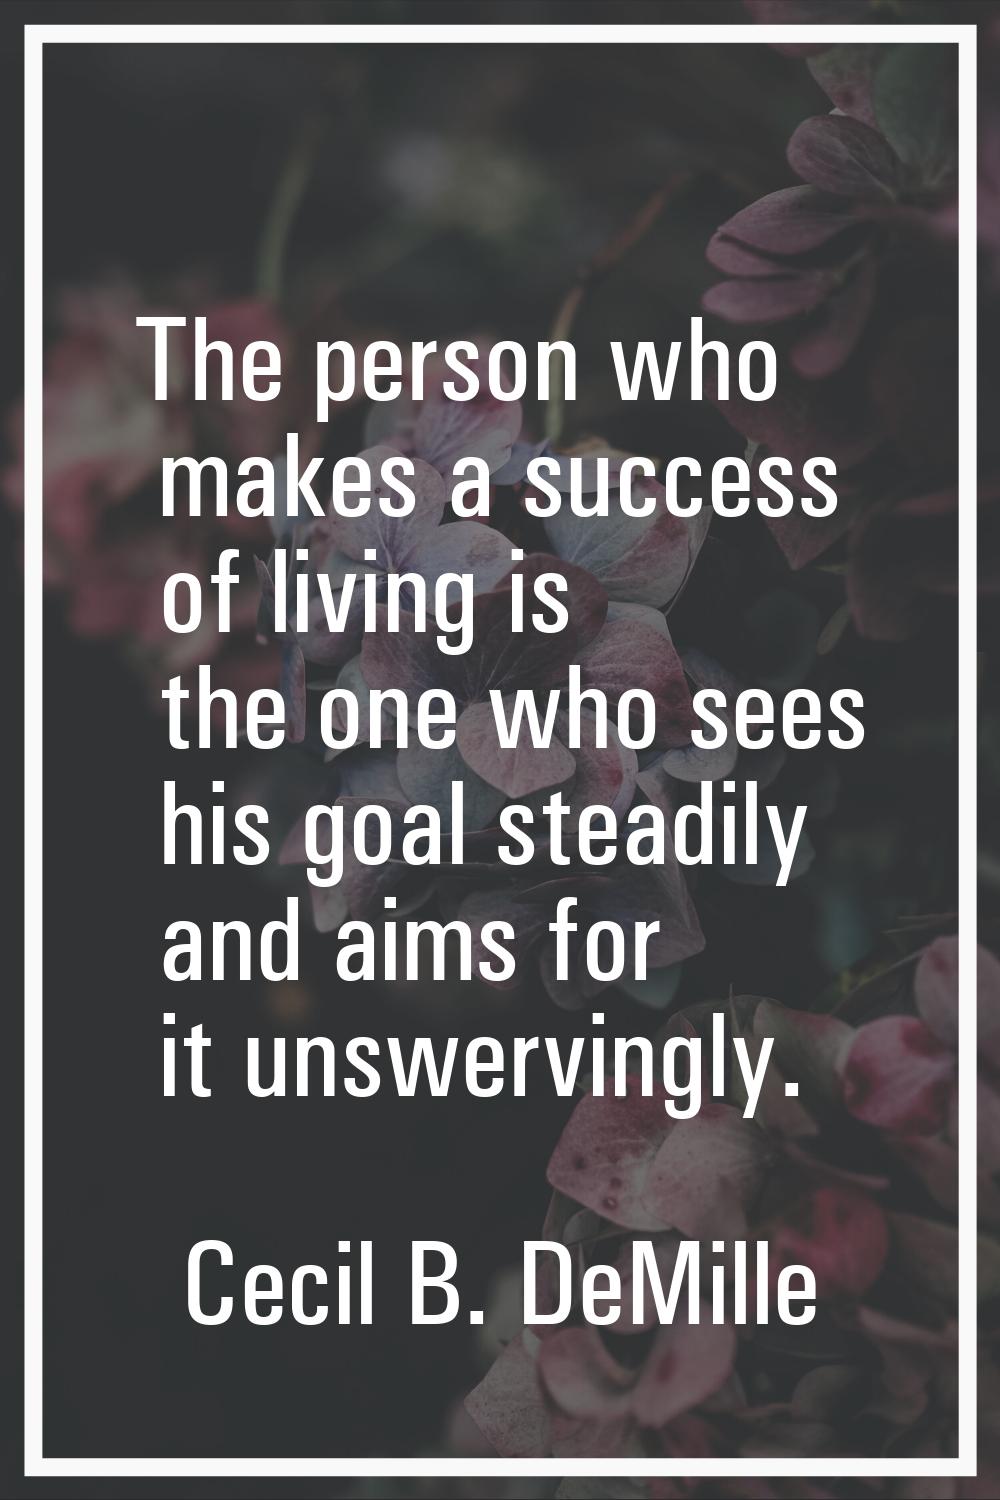 The person who makes a success of living is the one who sees his goal steadily and aims for it unsw